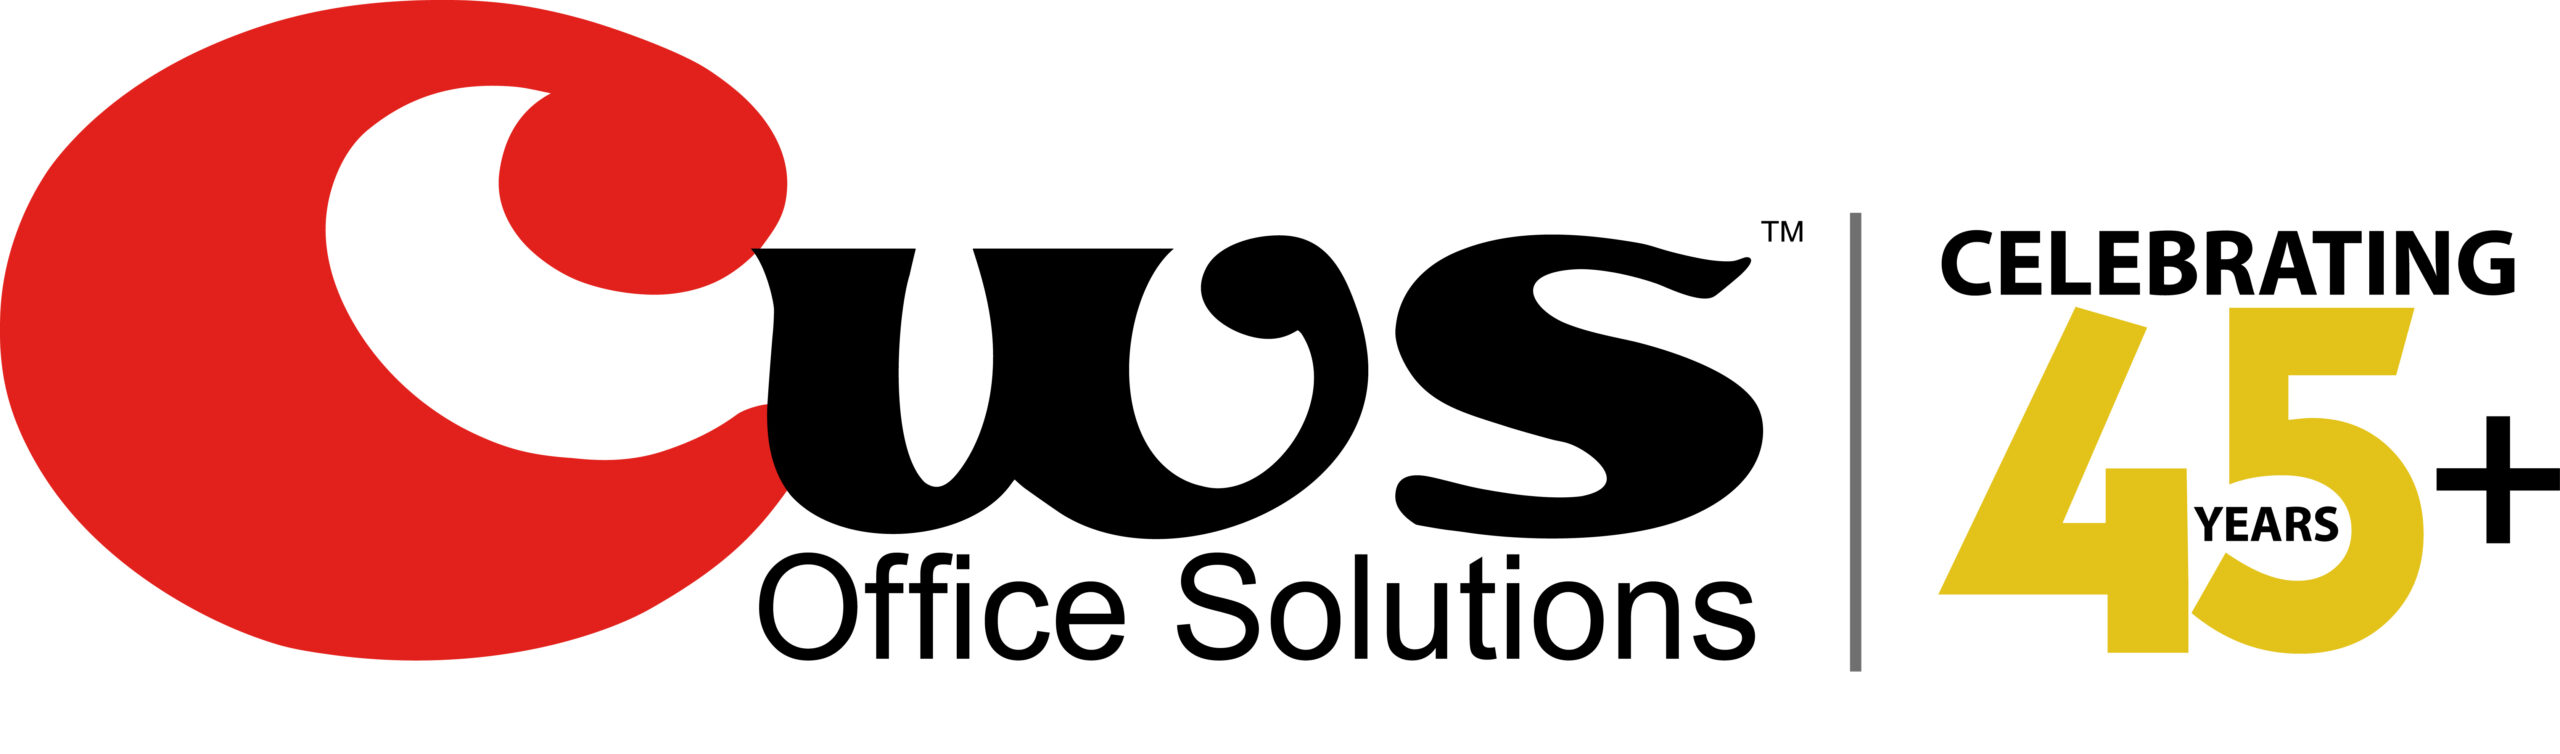 CWS Office Solutions